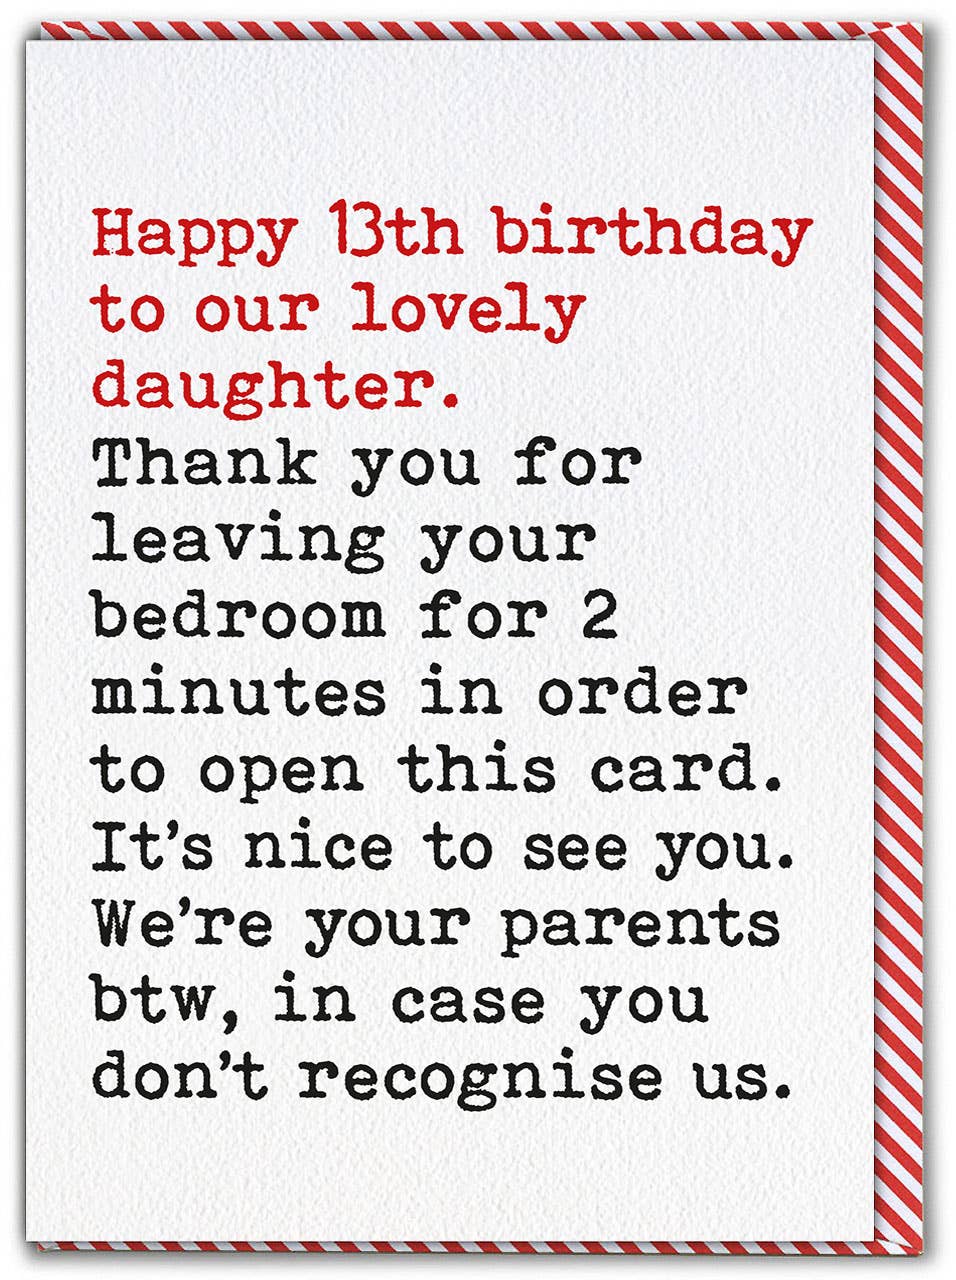 13th Birthday Card For Daughter - Leaving Bedroom